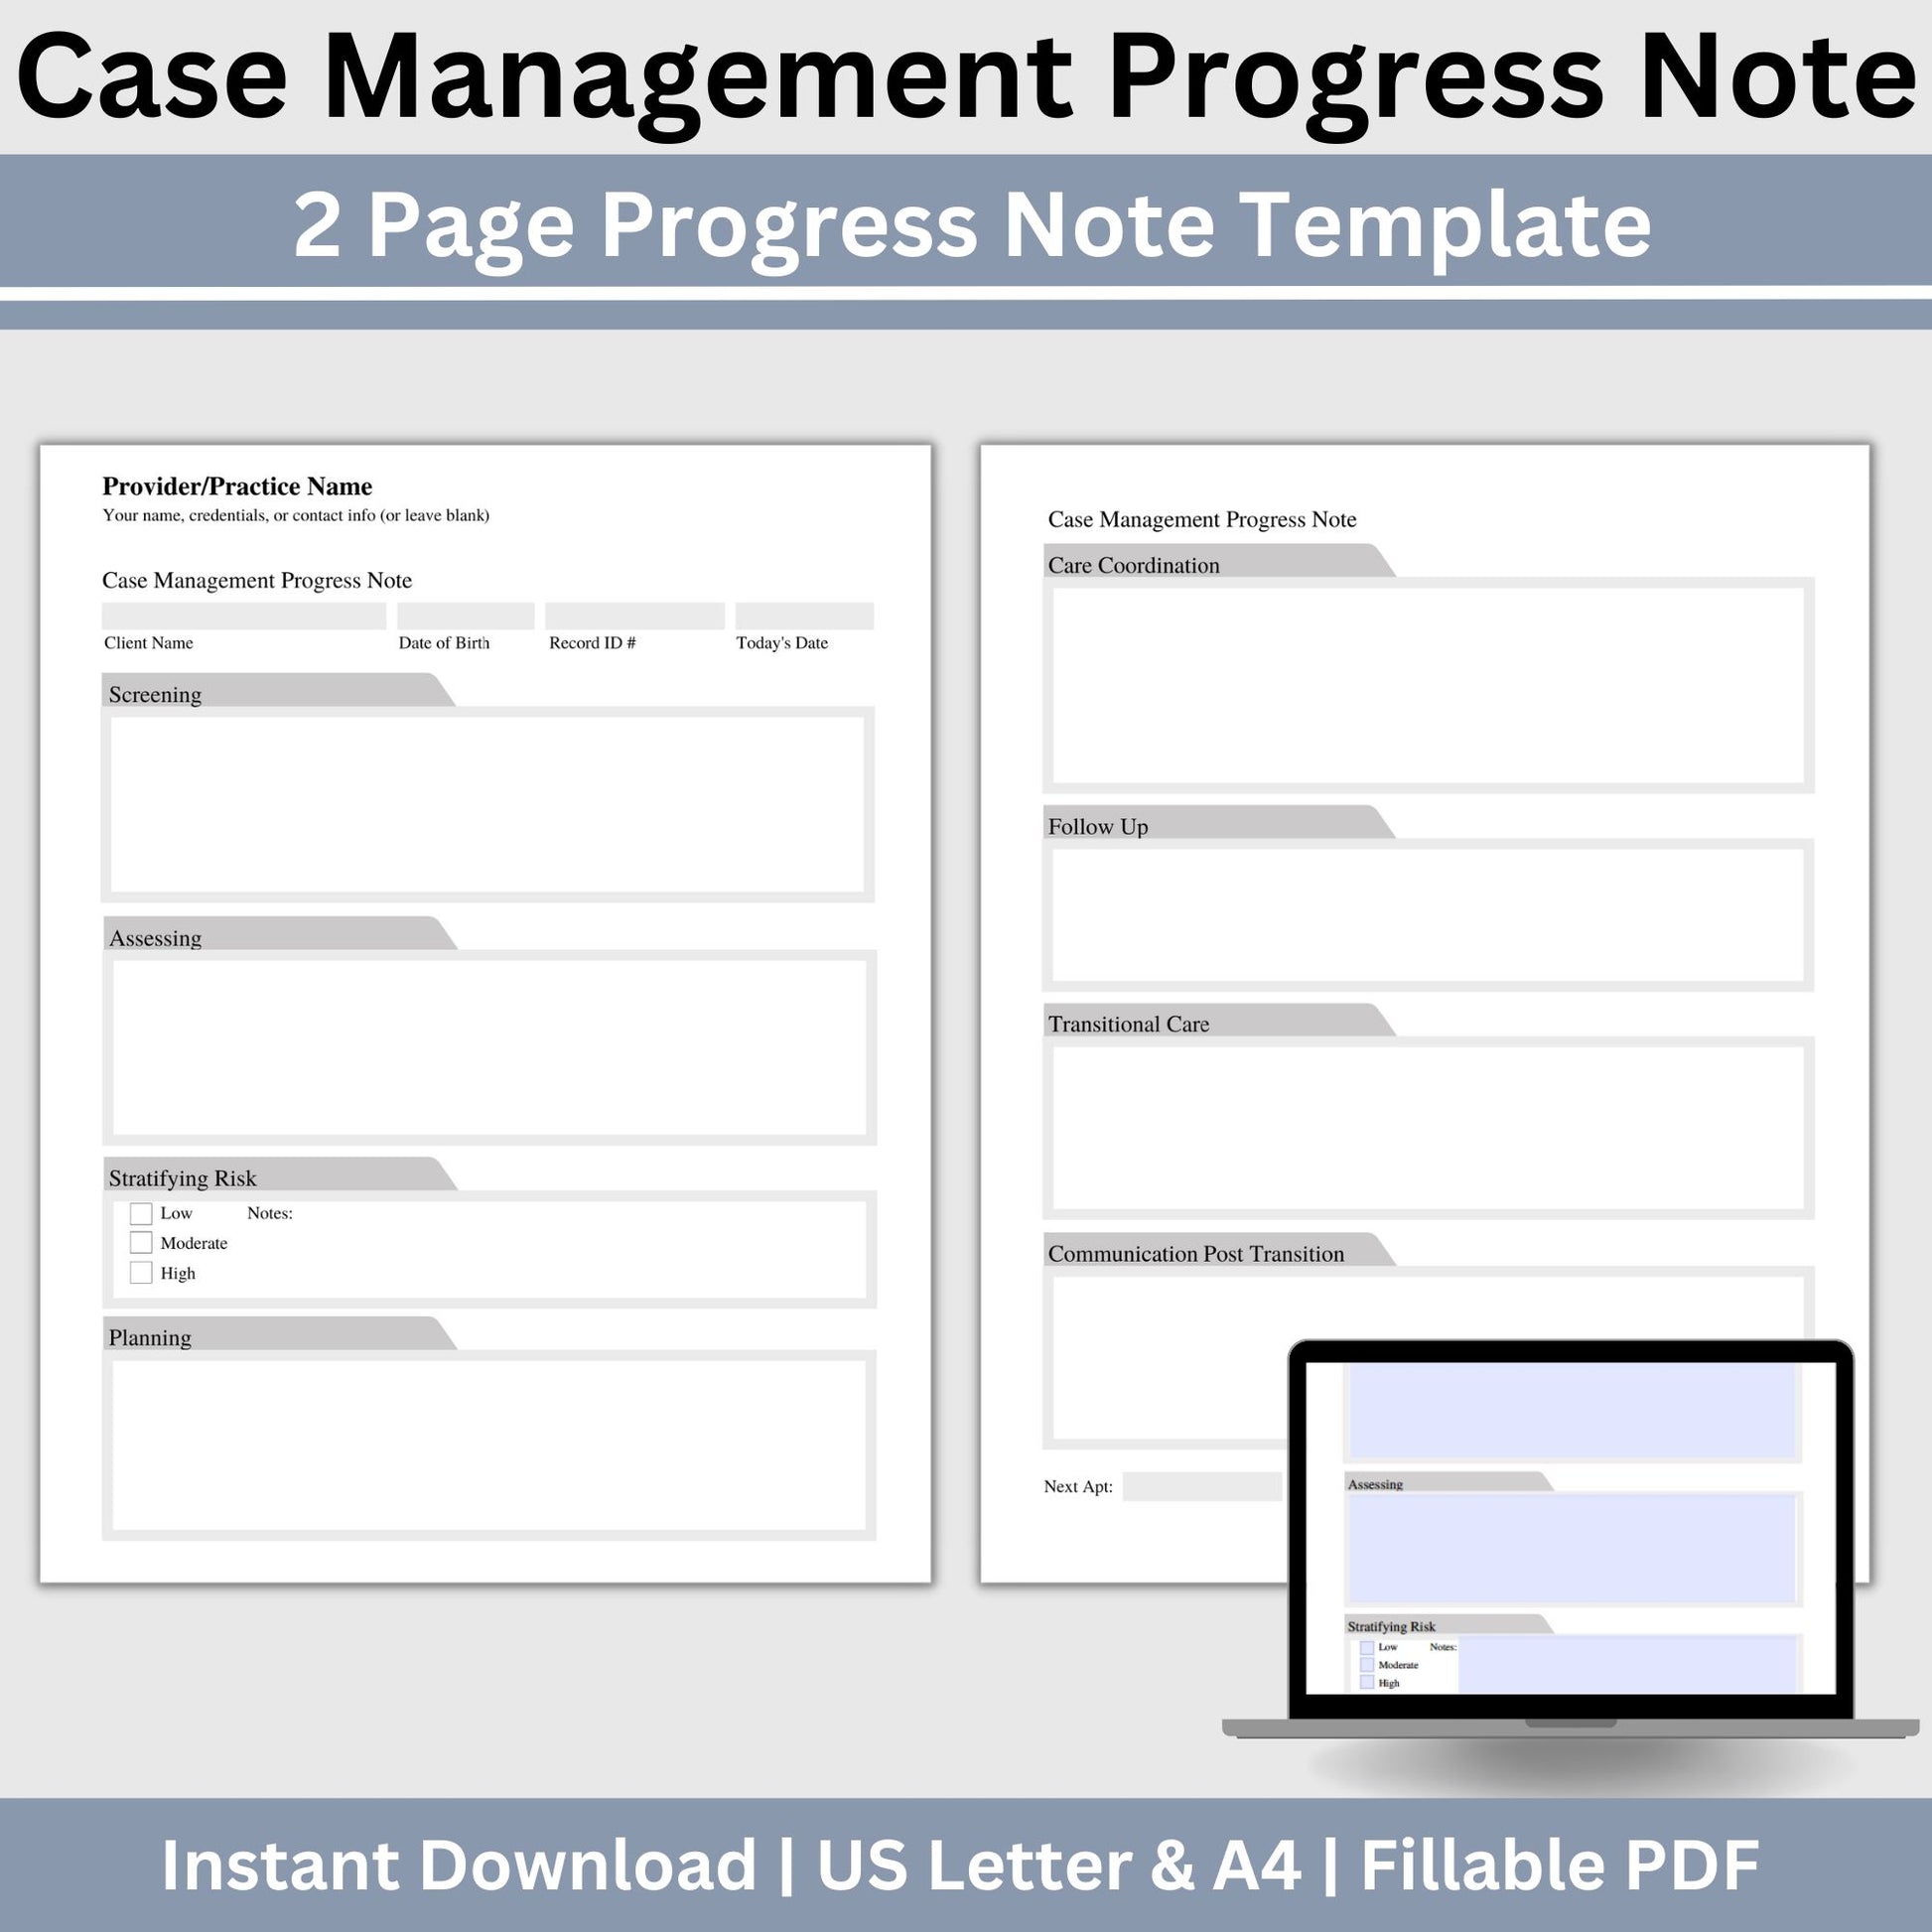 Case Management Template for Progress Notes. Tailored for case managers, school counselors, and social workers, this user-friendly template streamlines the process of recording progress notes effortlessly.